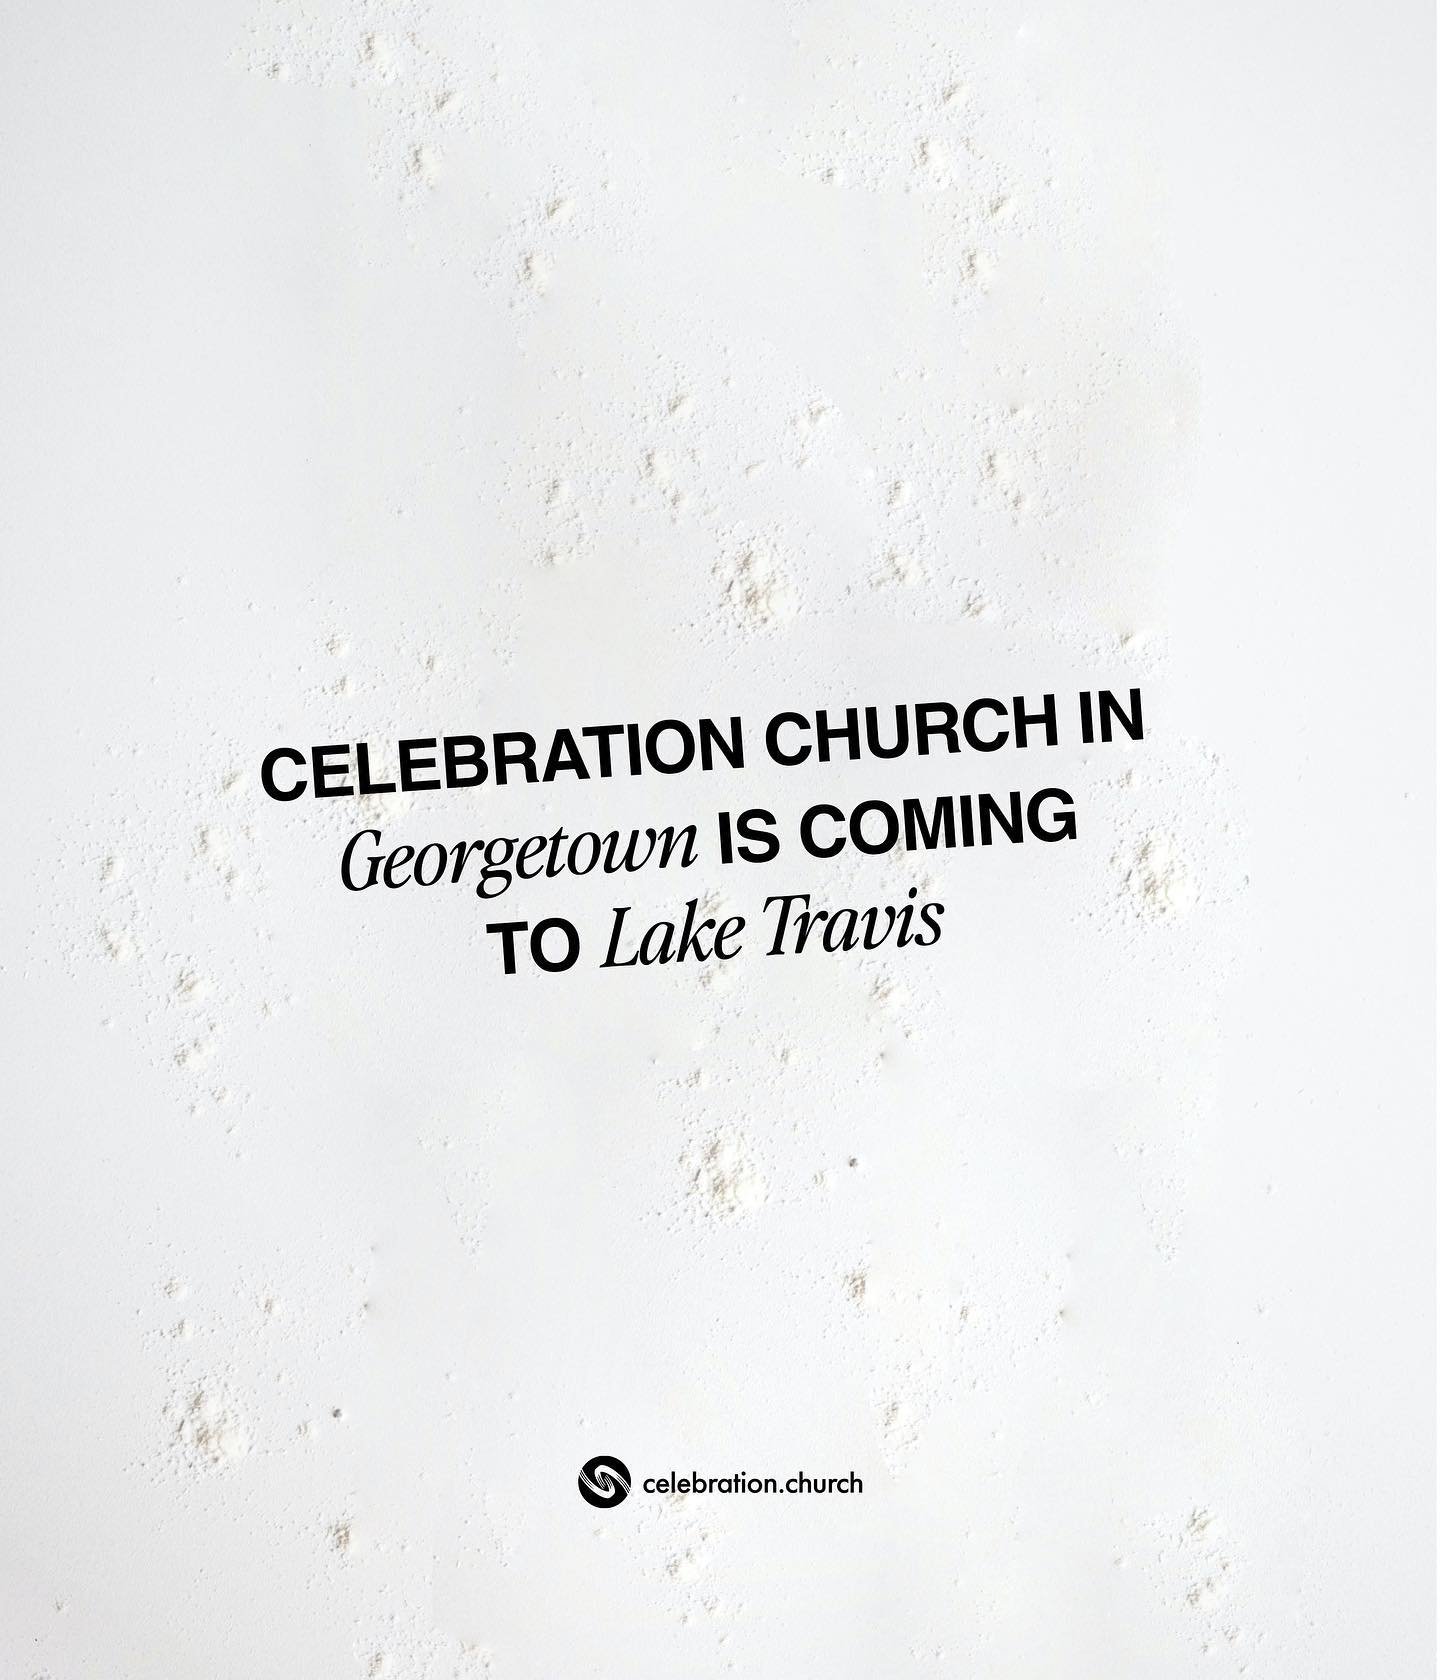 Celebration Church in Lake Travis

Opening 2024 

At Celebration Church You Can Expect&hellip;

🤍Bible Centered Teaching 

💬Encouraging Messages

👨&zwj;👩&zwj;👧&zwj;👦Ministry for All Ages

😀Laughter &amp; Joy

🤝Strong Relationships

All in a f